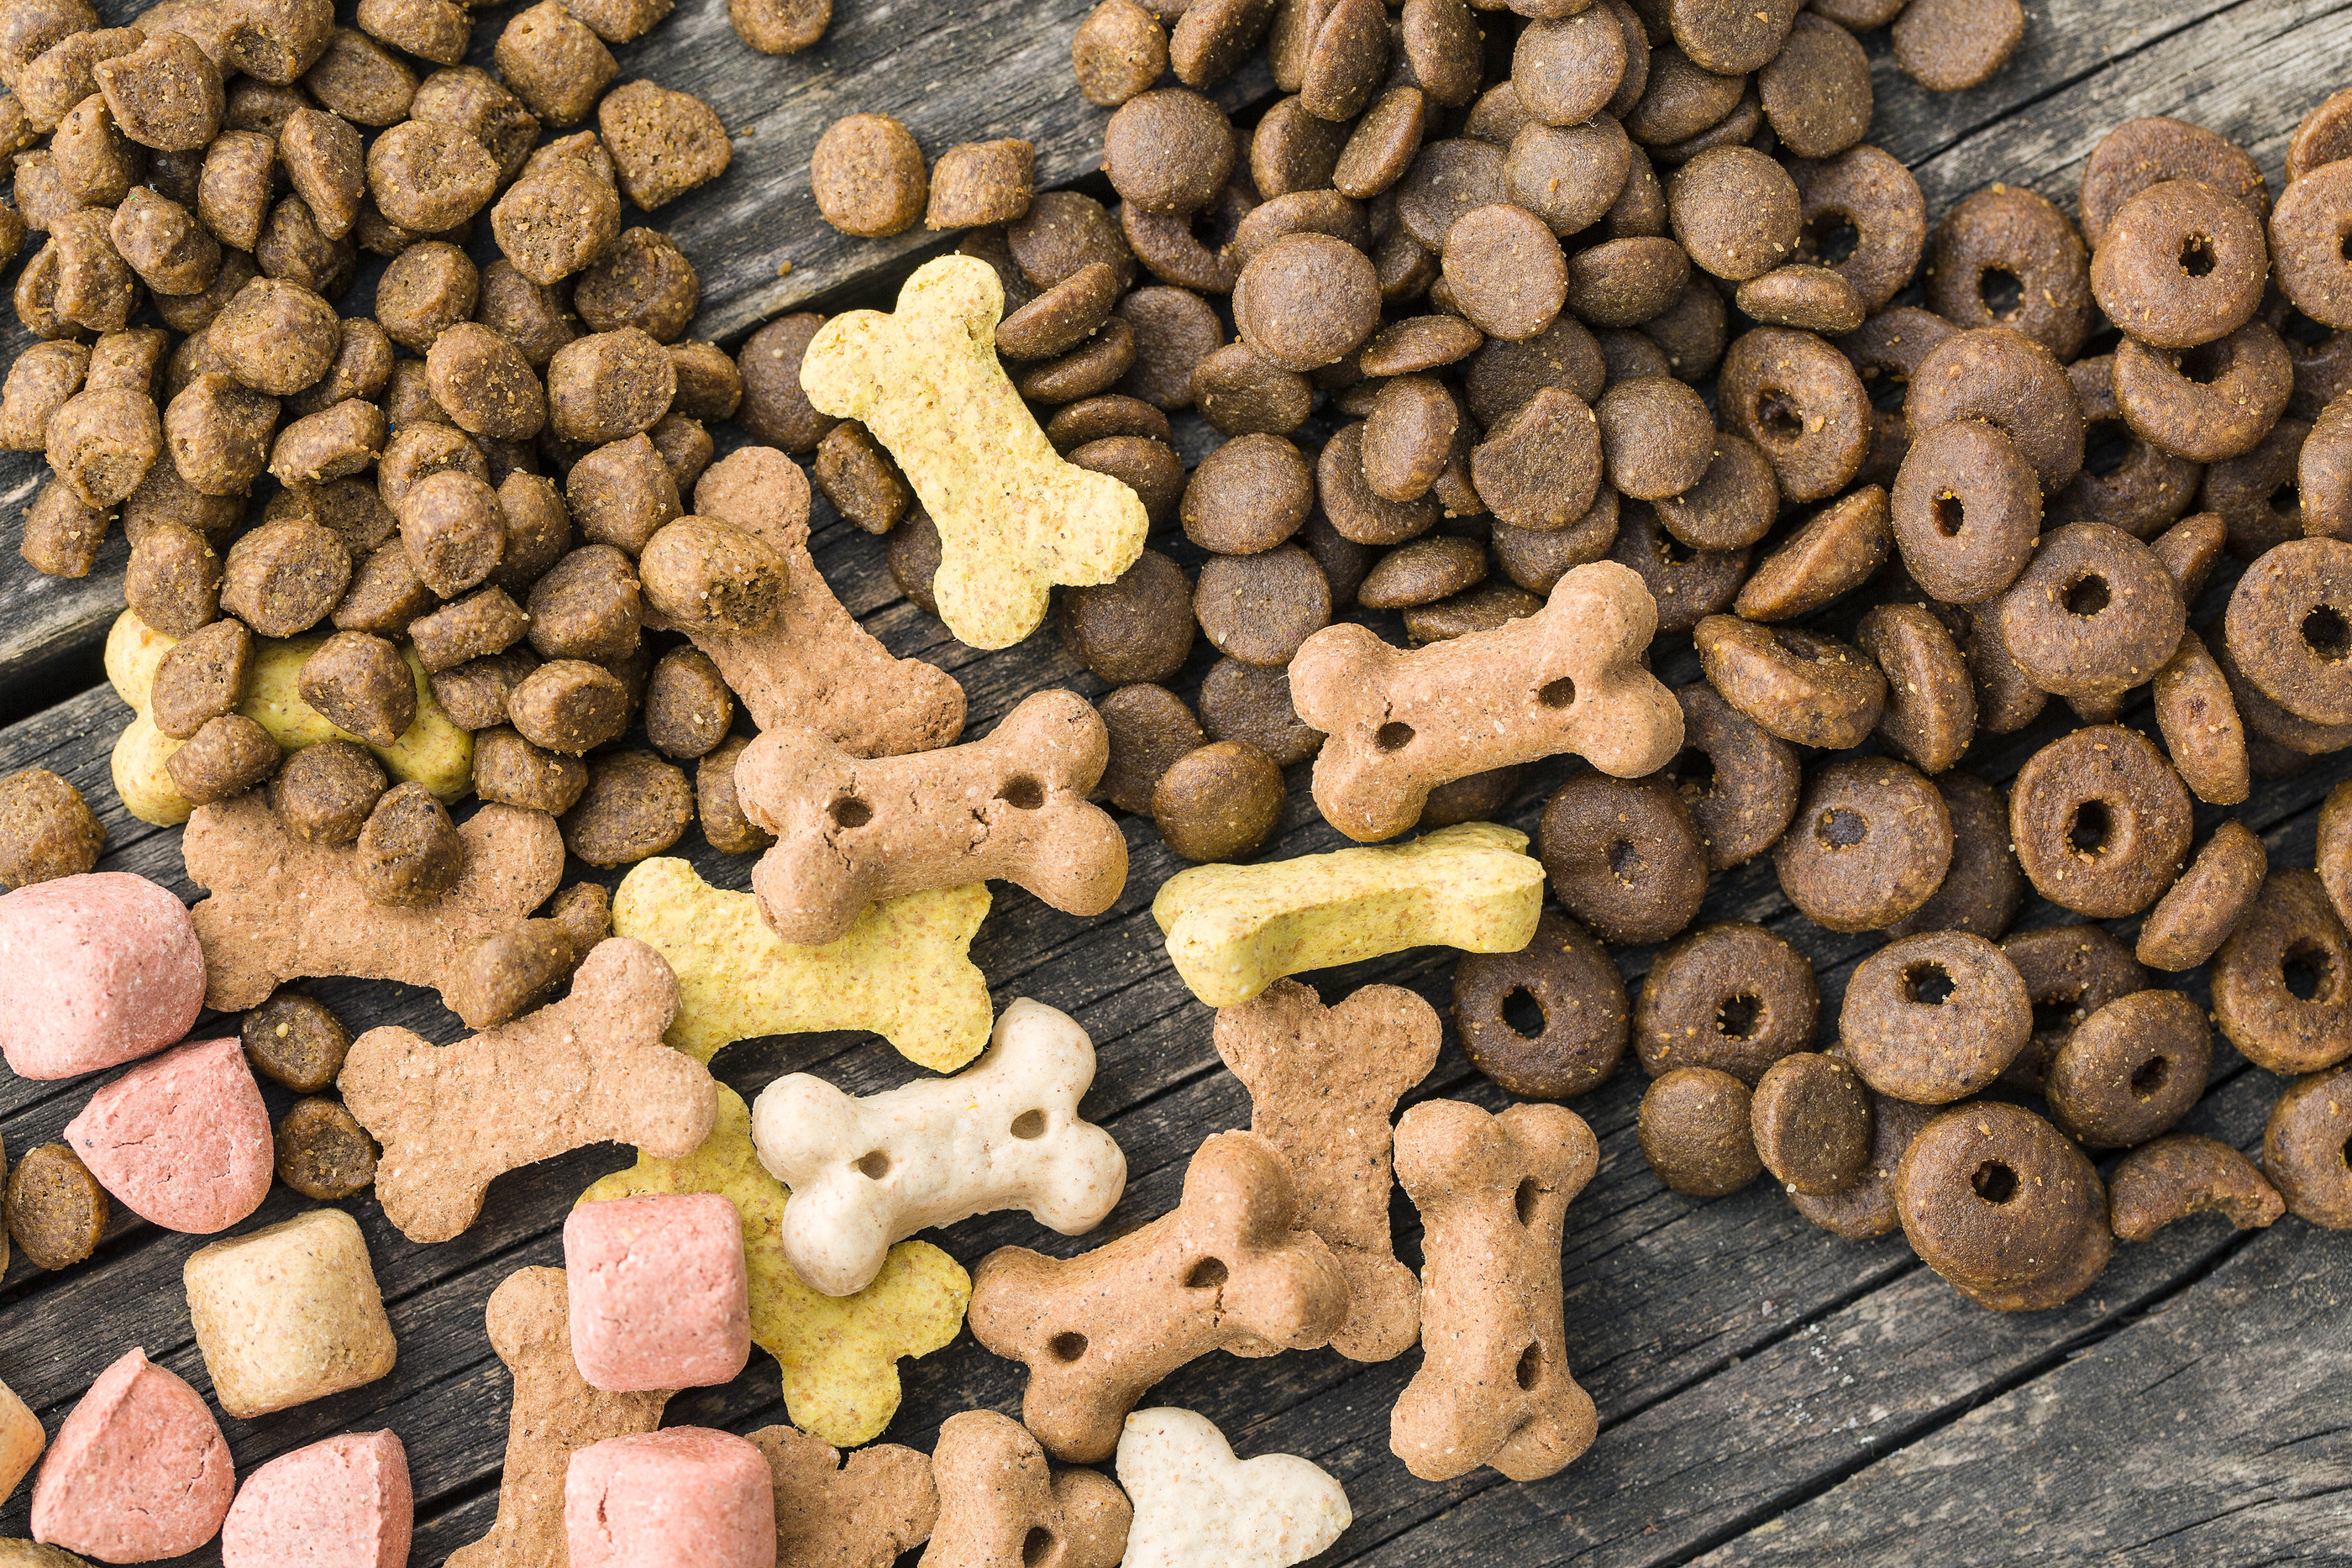 Top Rated Dog Food